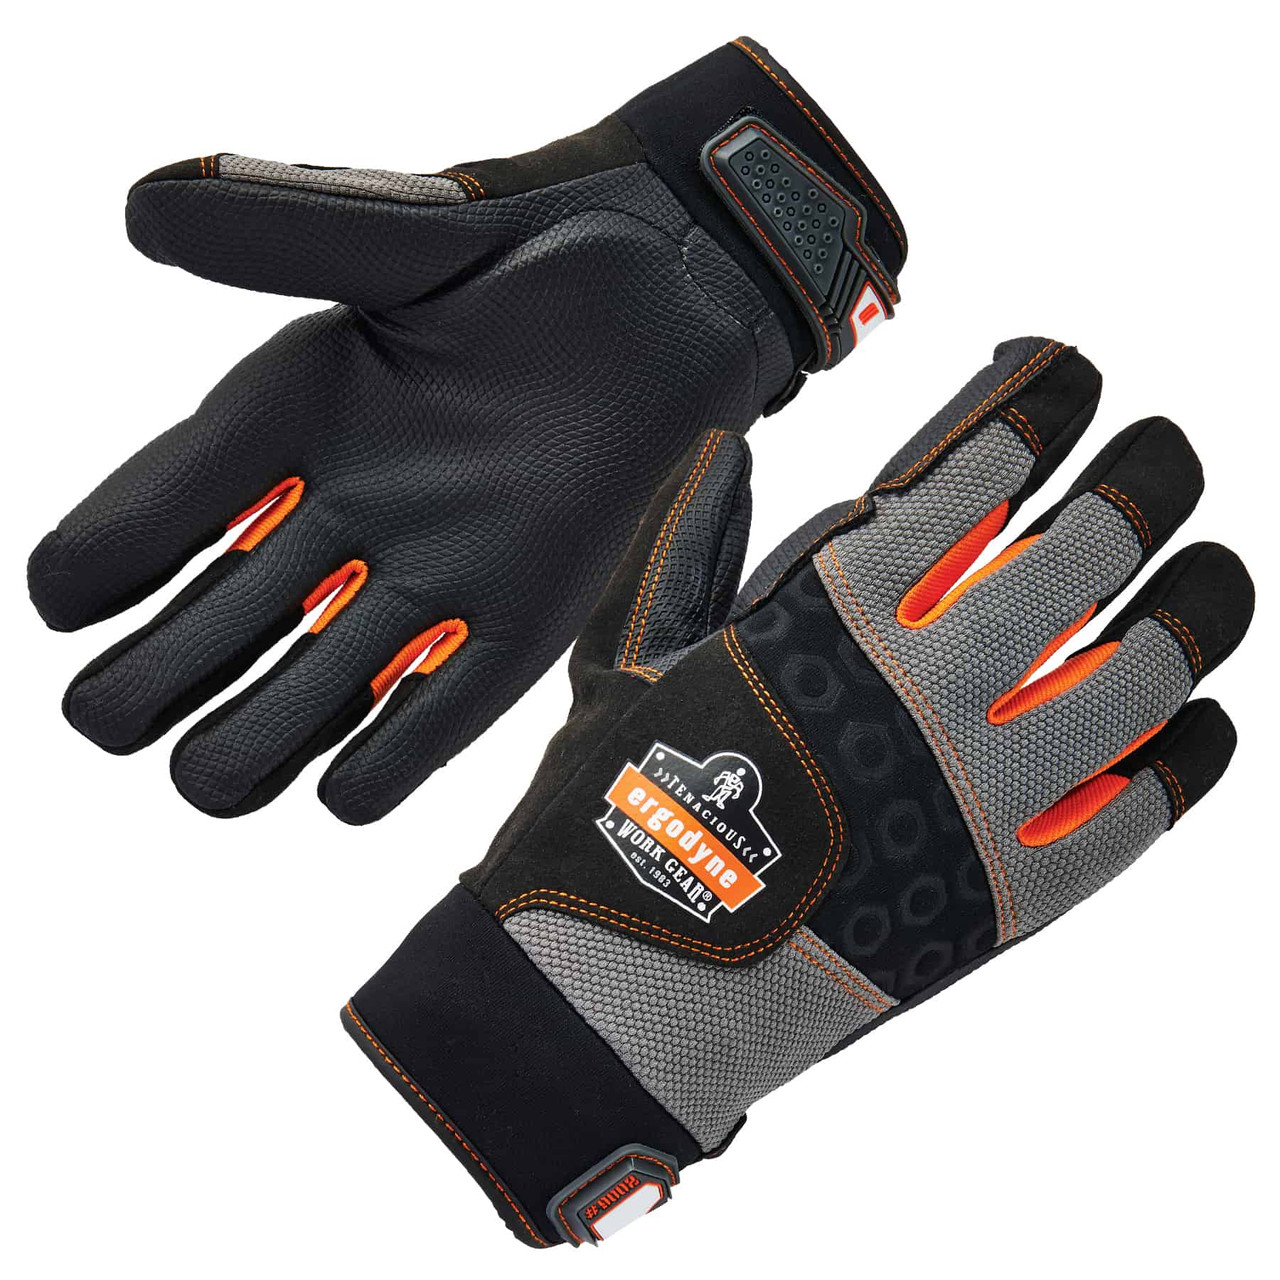 https://cdn11.bigcommerce.com/s-82xqw/images/stencil/1280x1280/products/15336/36004/17702-9002-ansi-iso-certified-full-finger-anti-vibration-gloves-paired__70296.1687314003.jpg?c=2